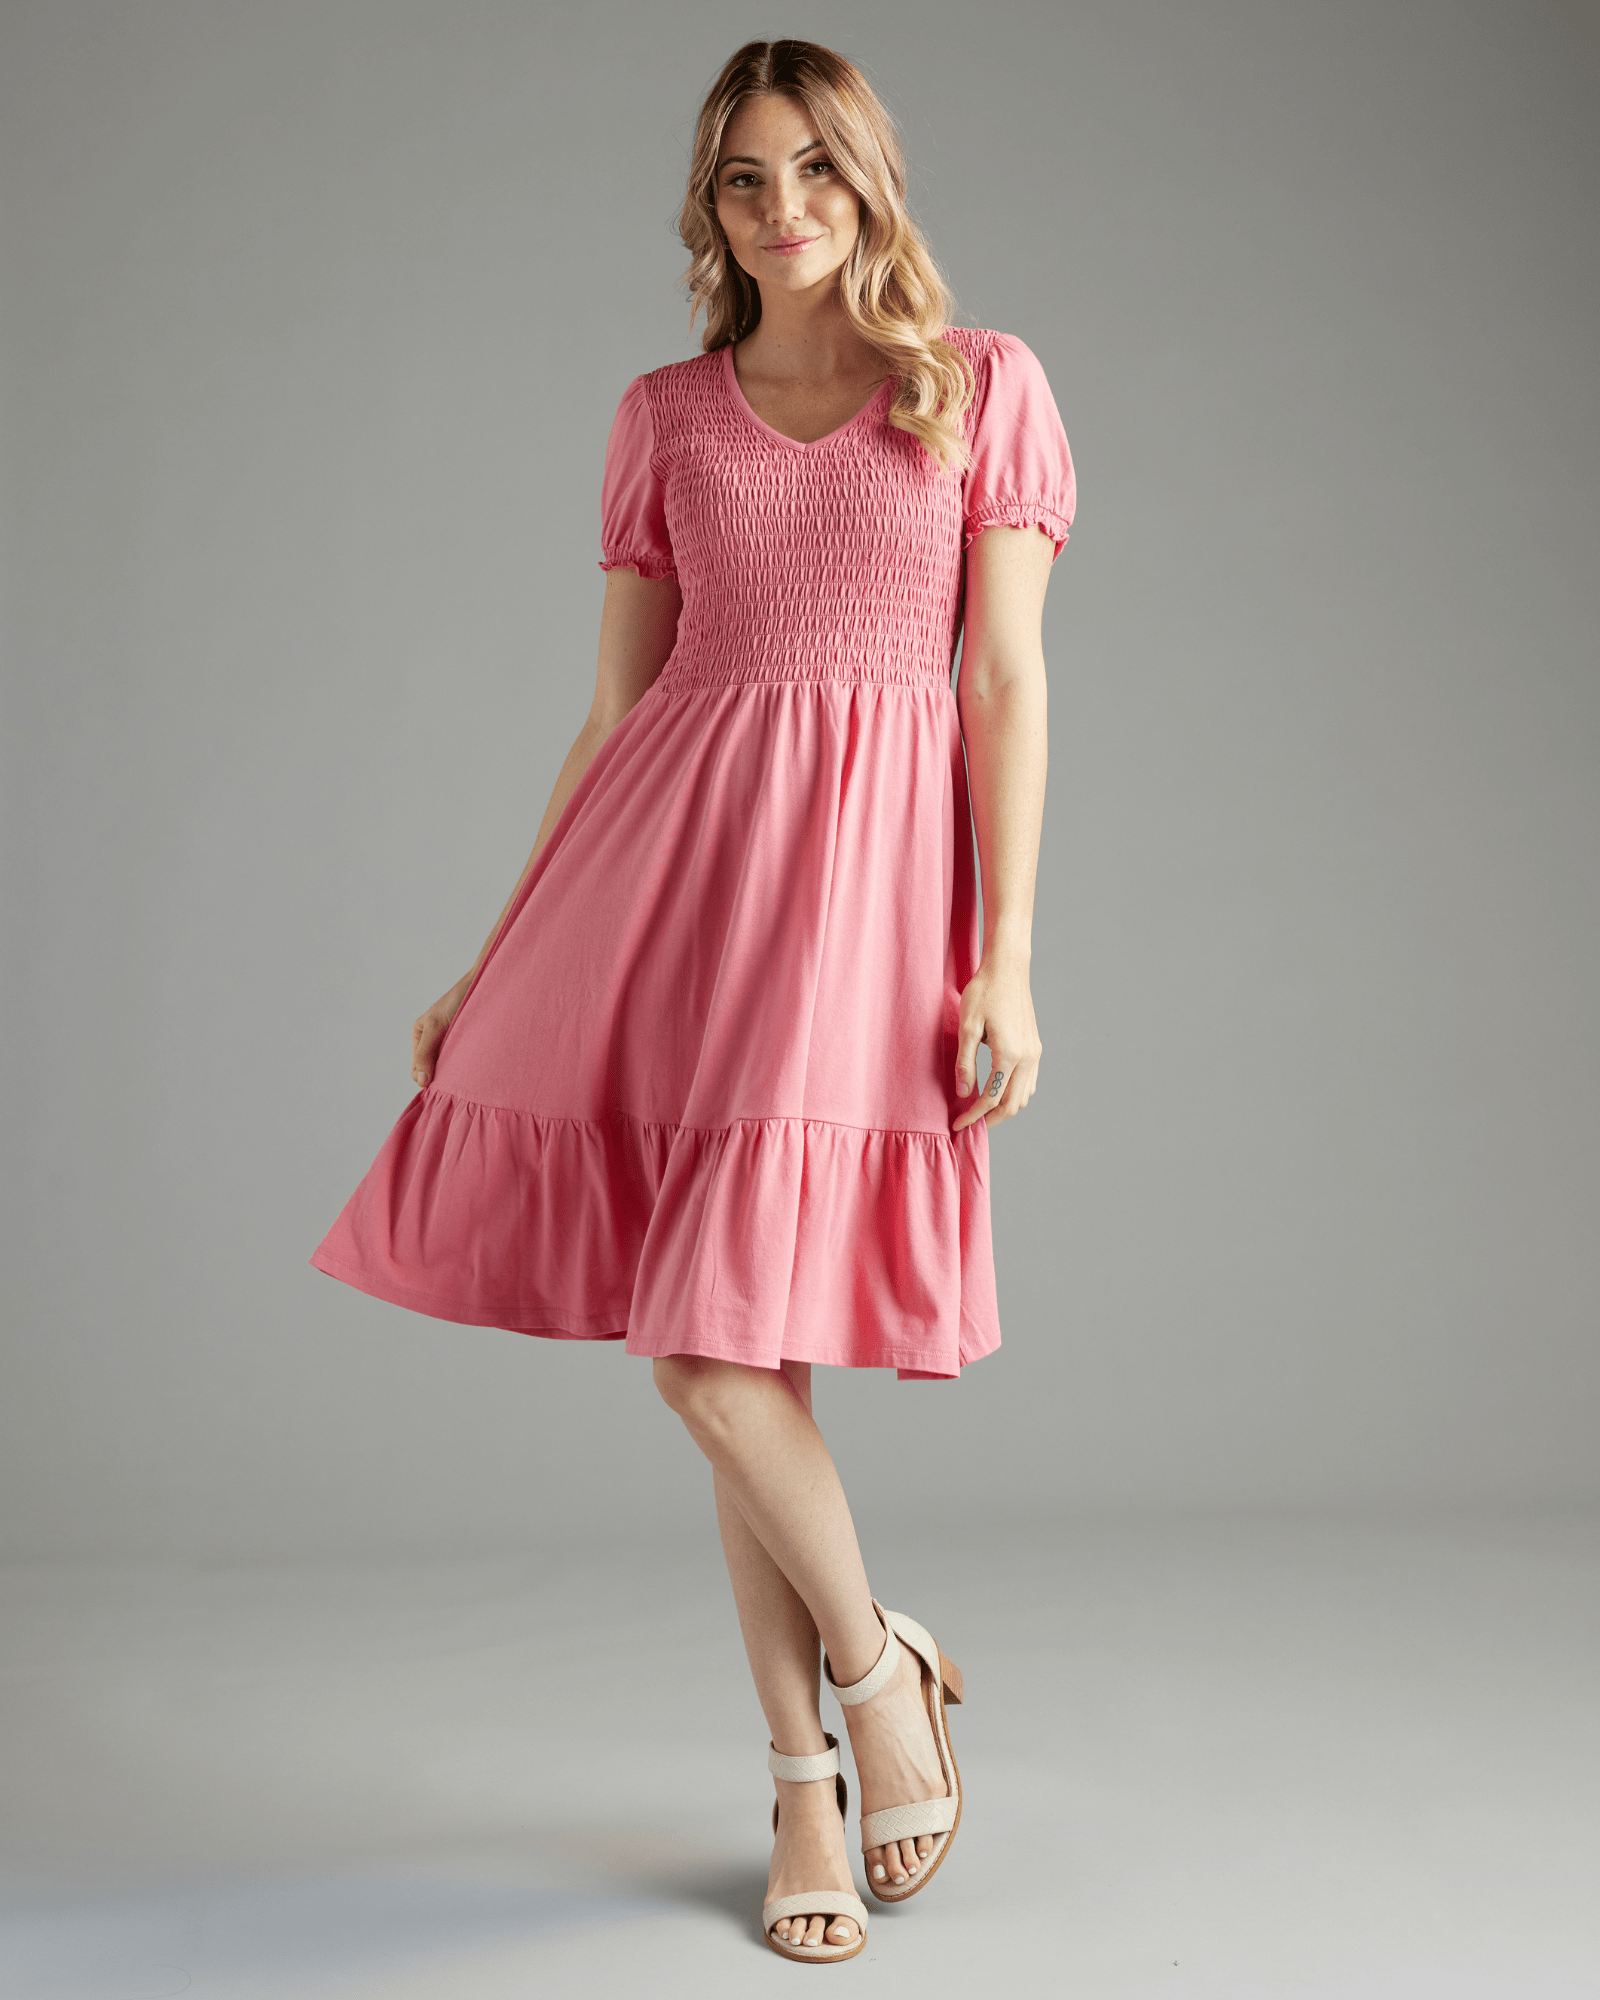 Woman in a short sleeve, knee-length, smocked bodice, pink dress